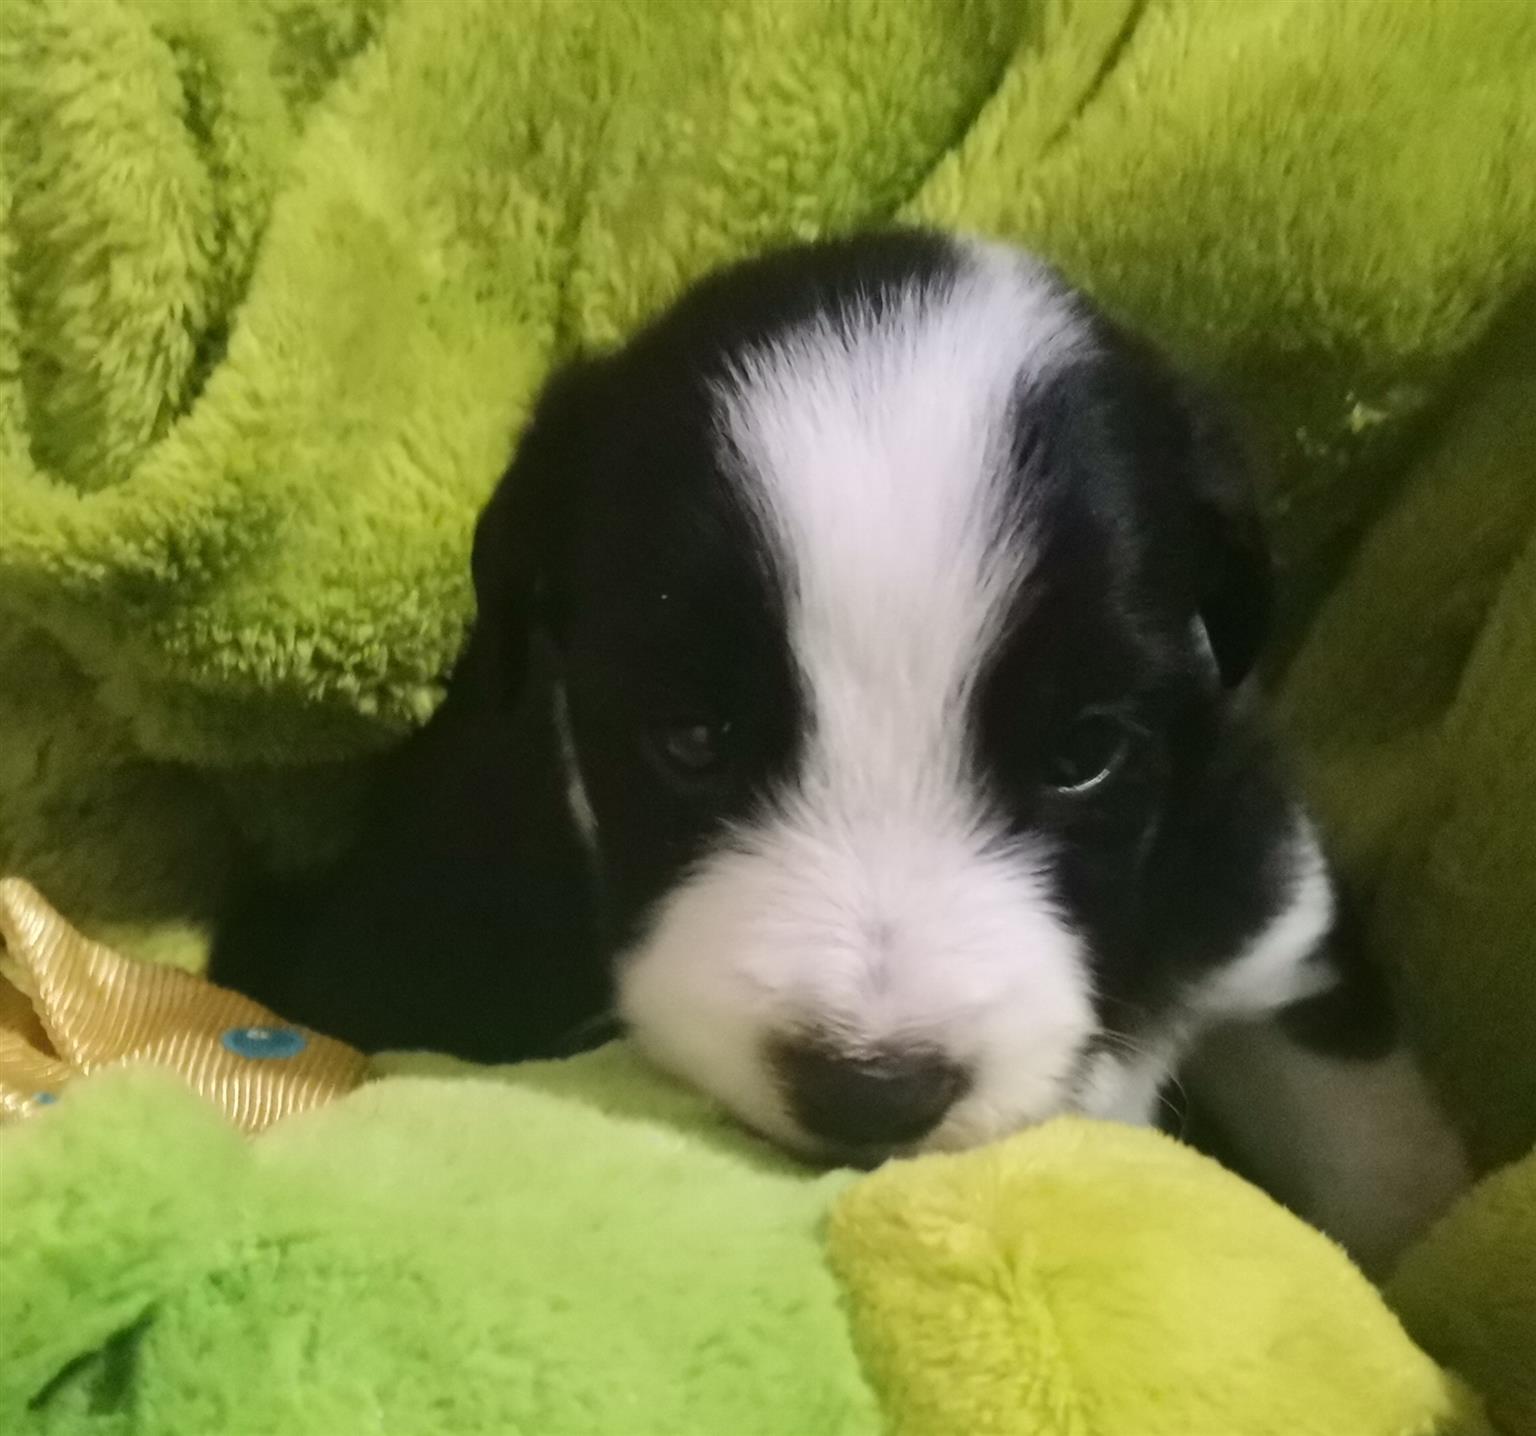 Bordercollie puppy's / skaaphondjies. 1 female and 5 males